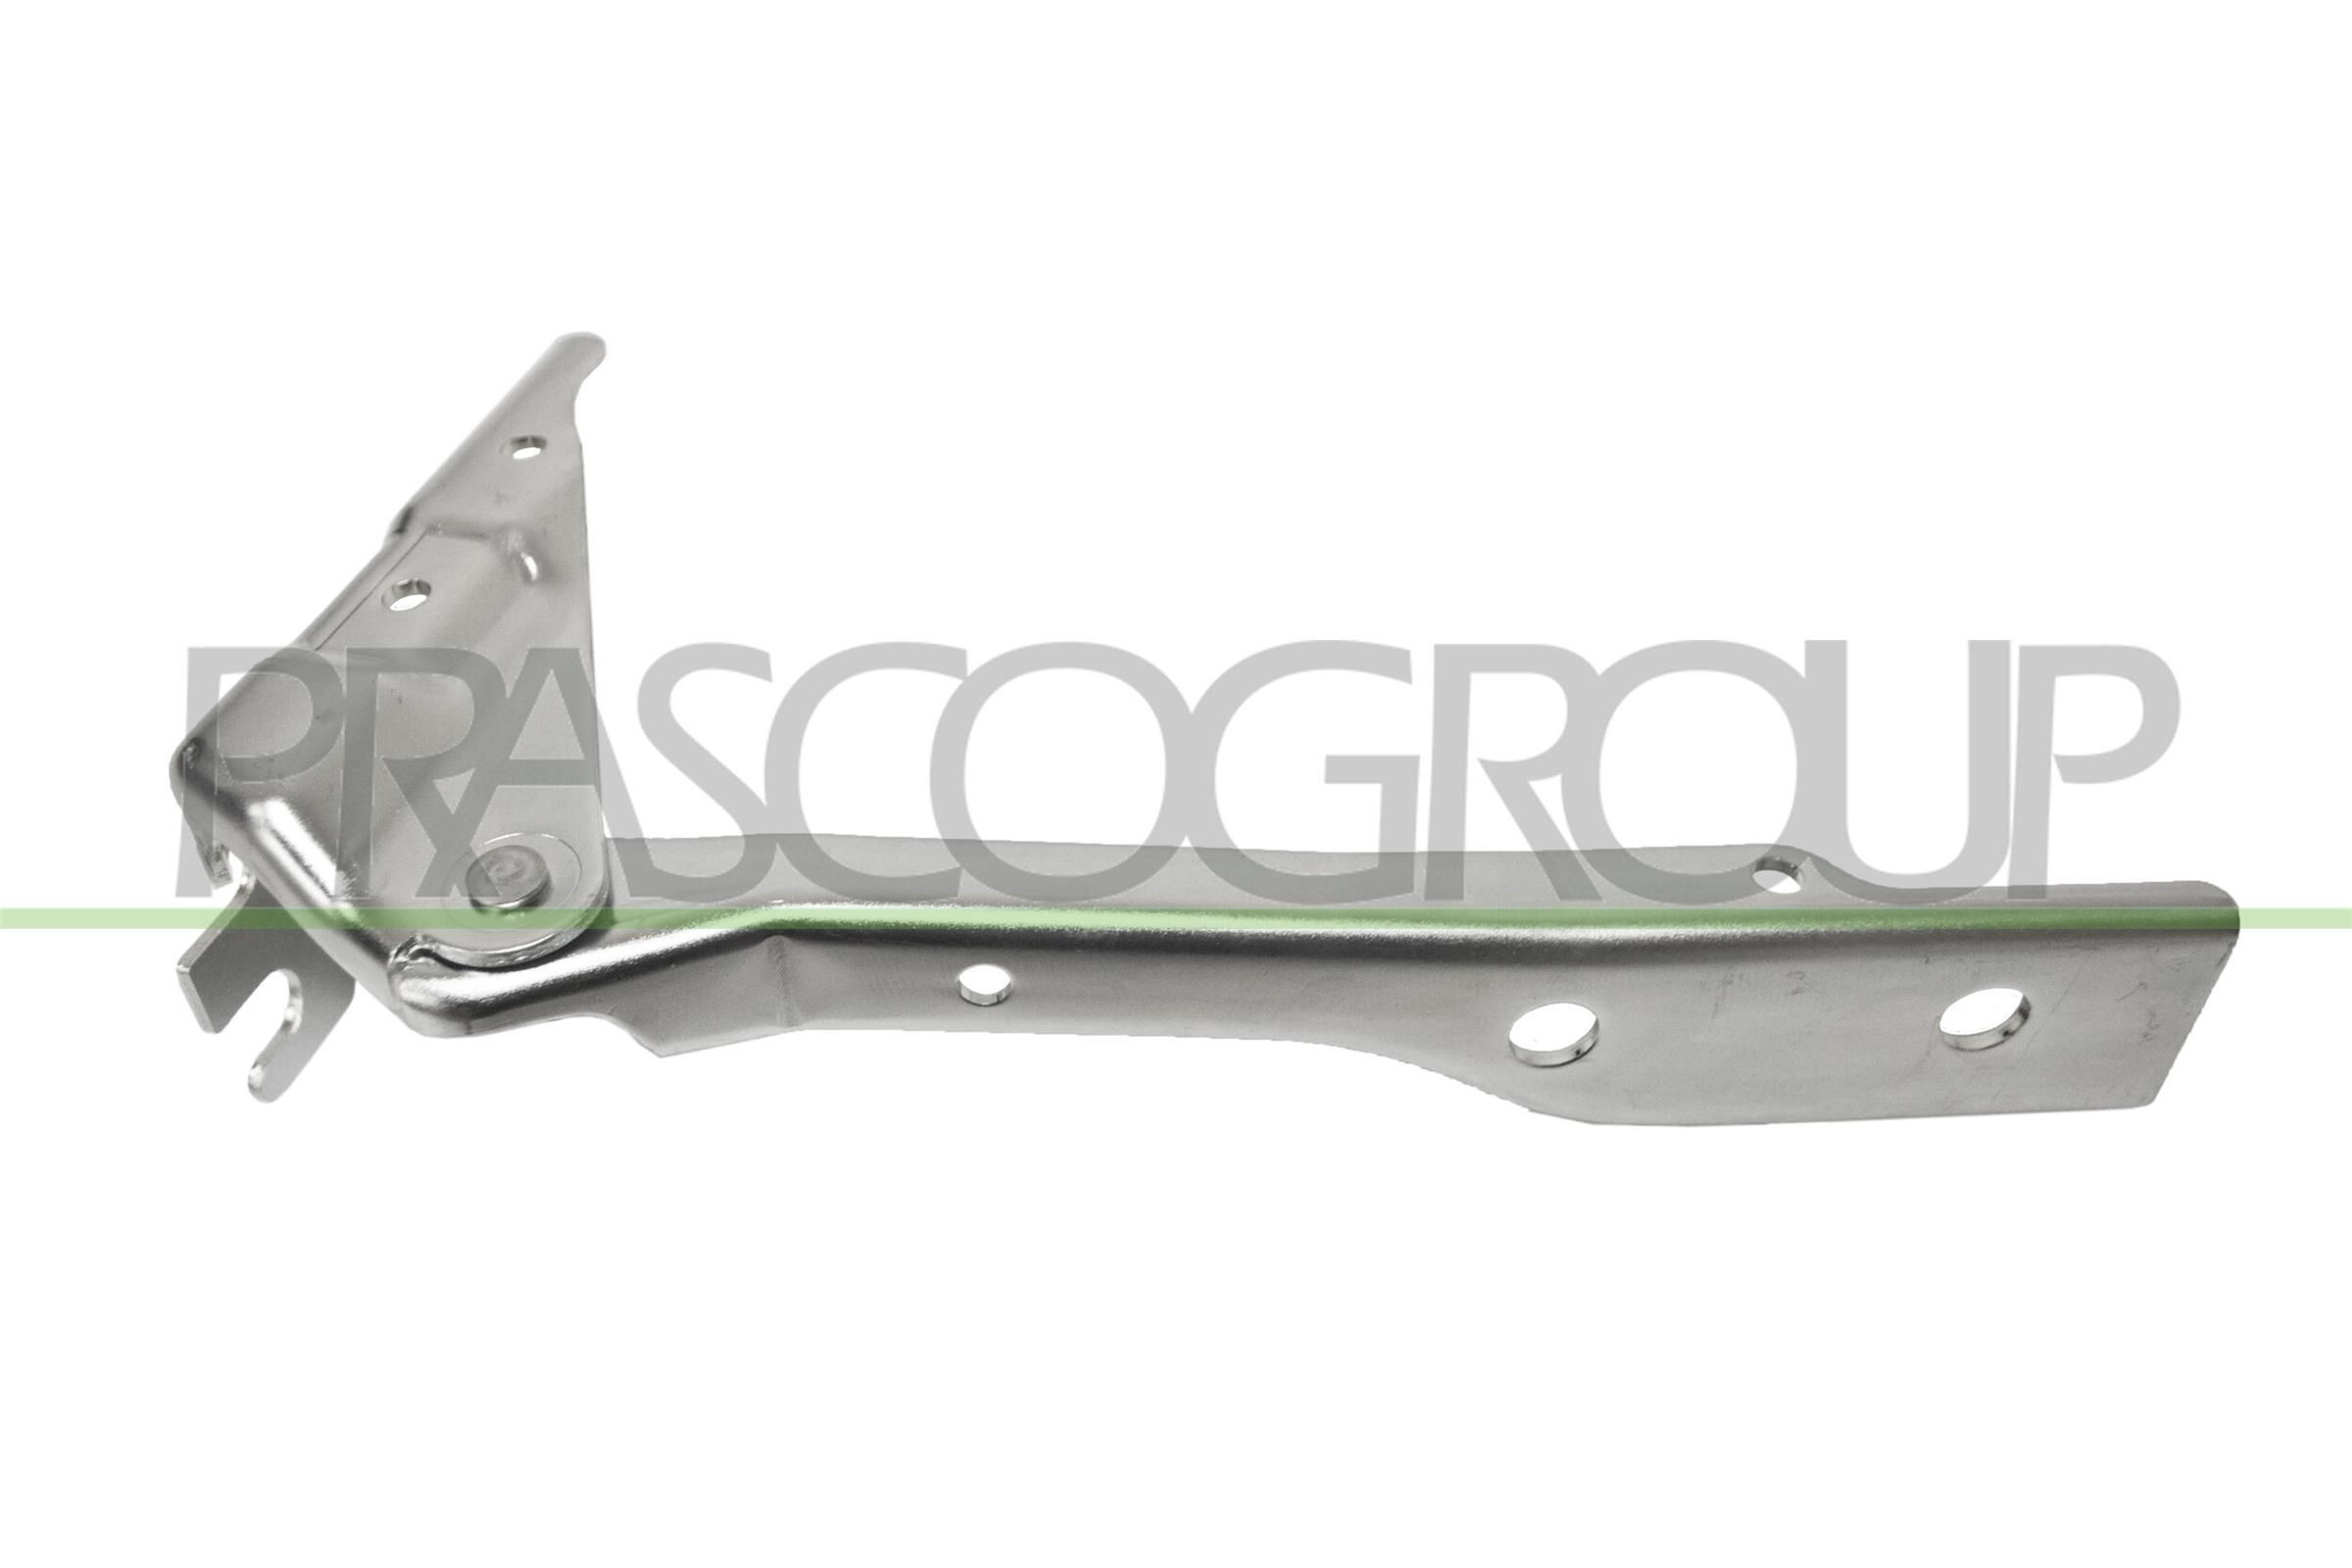 Hood and parts PRASCO Left - VG0233704